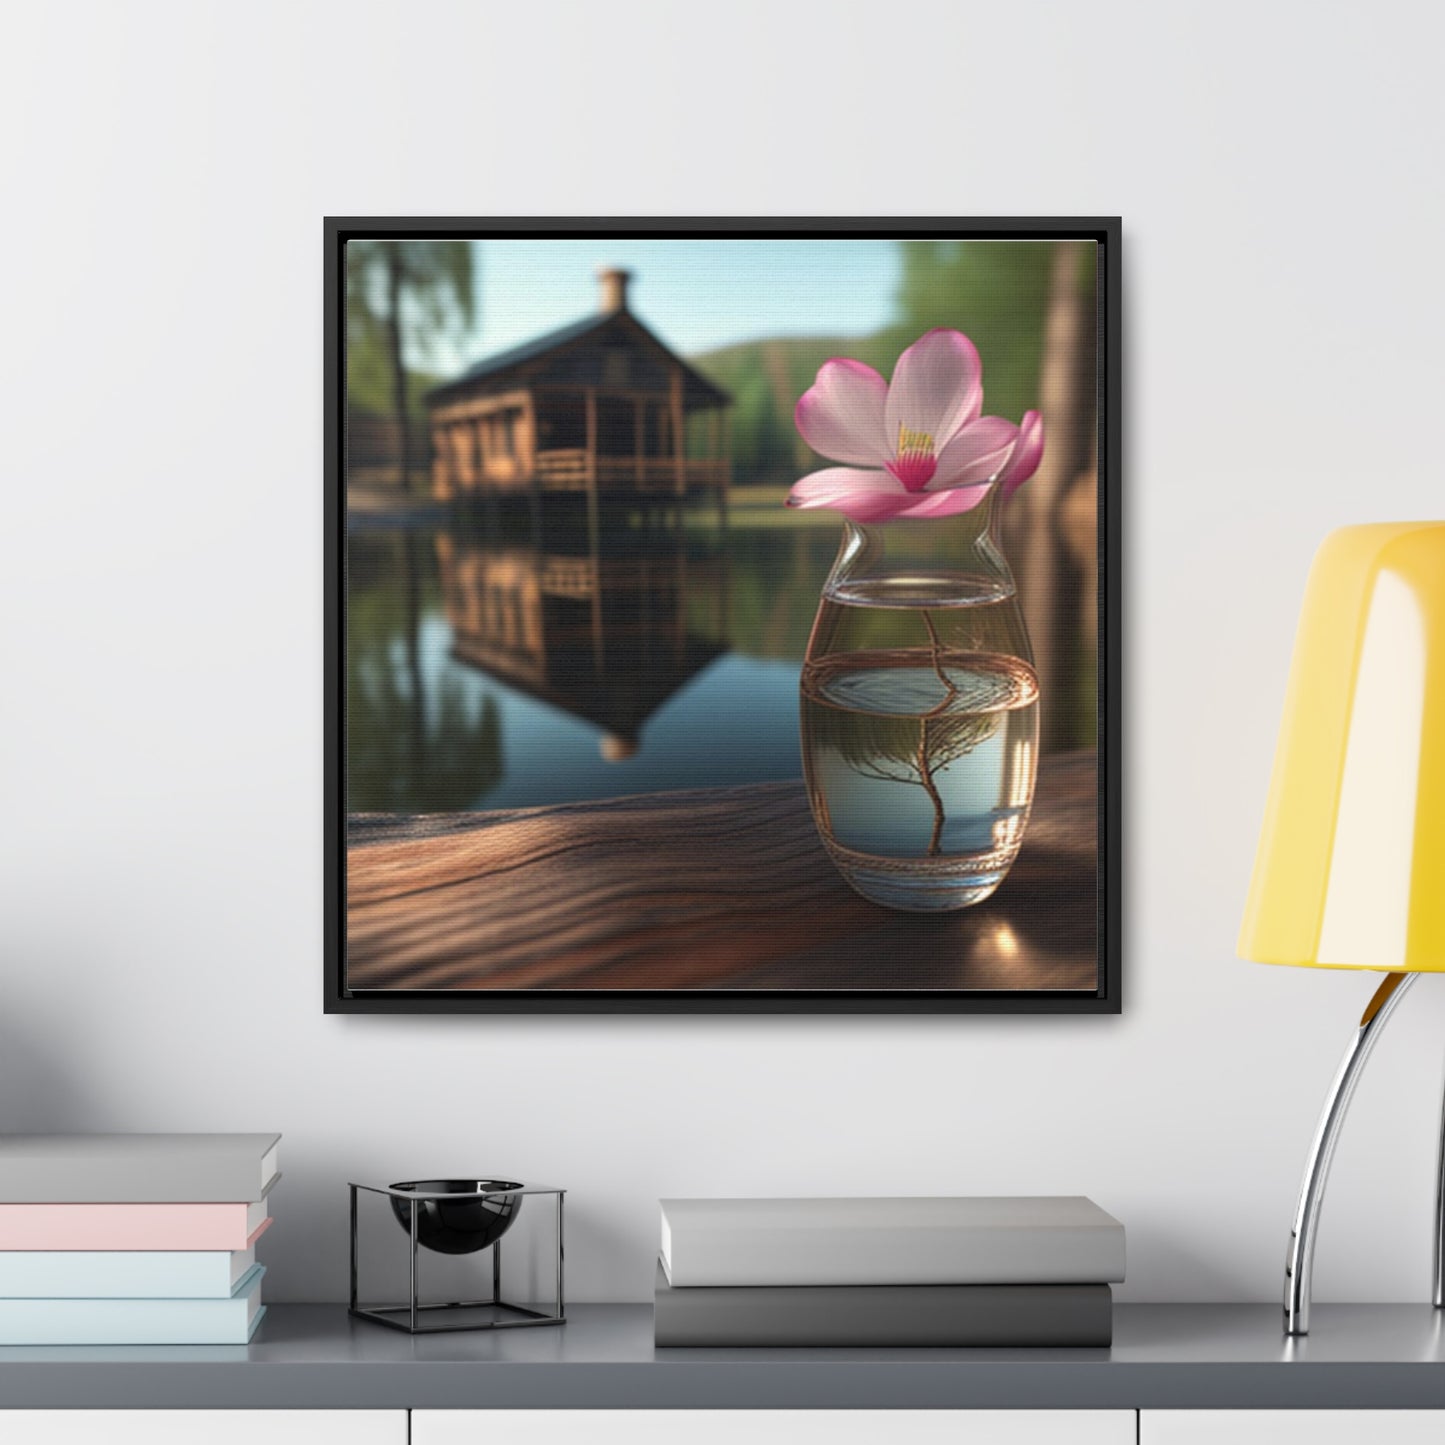 Gallery Canvas Wraps, Square Frame Magnolia in a Glass vase 1